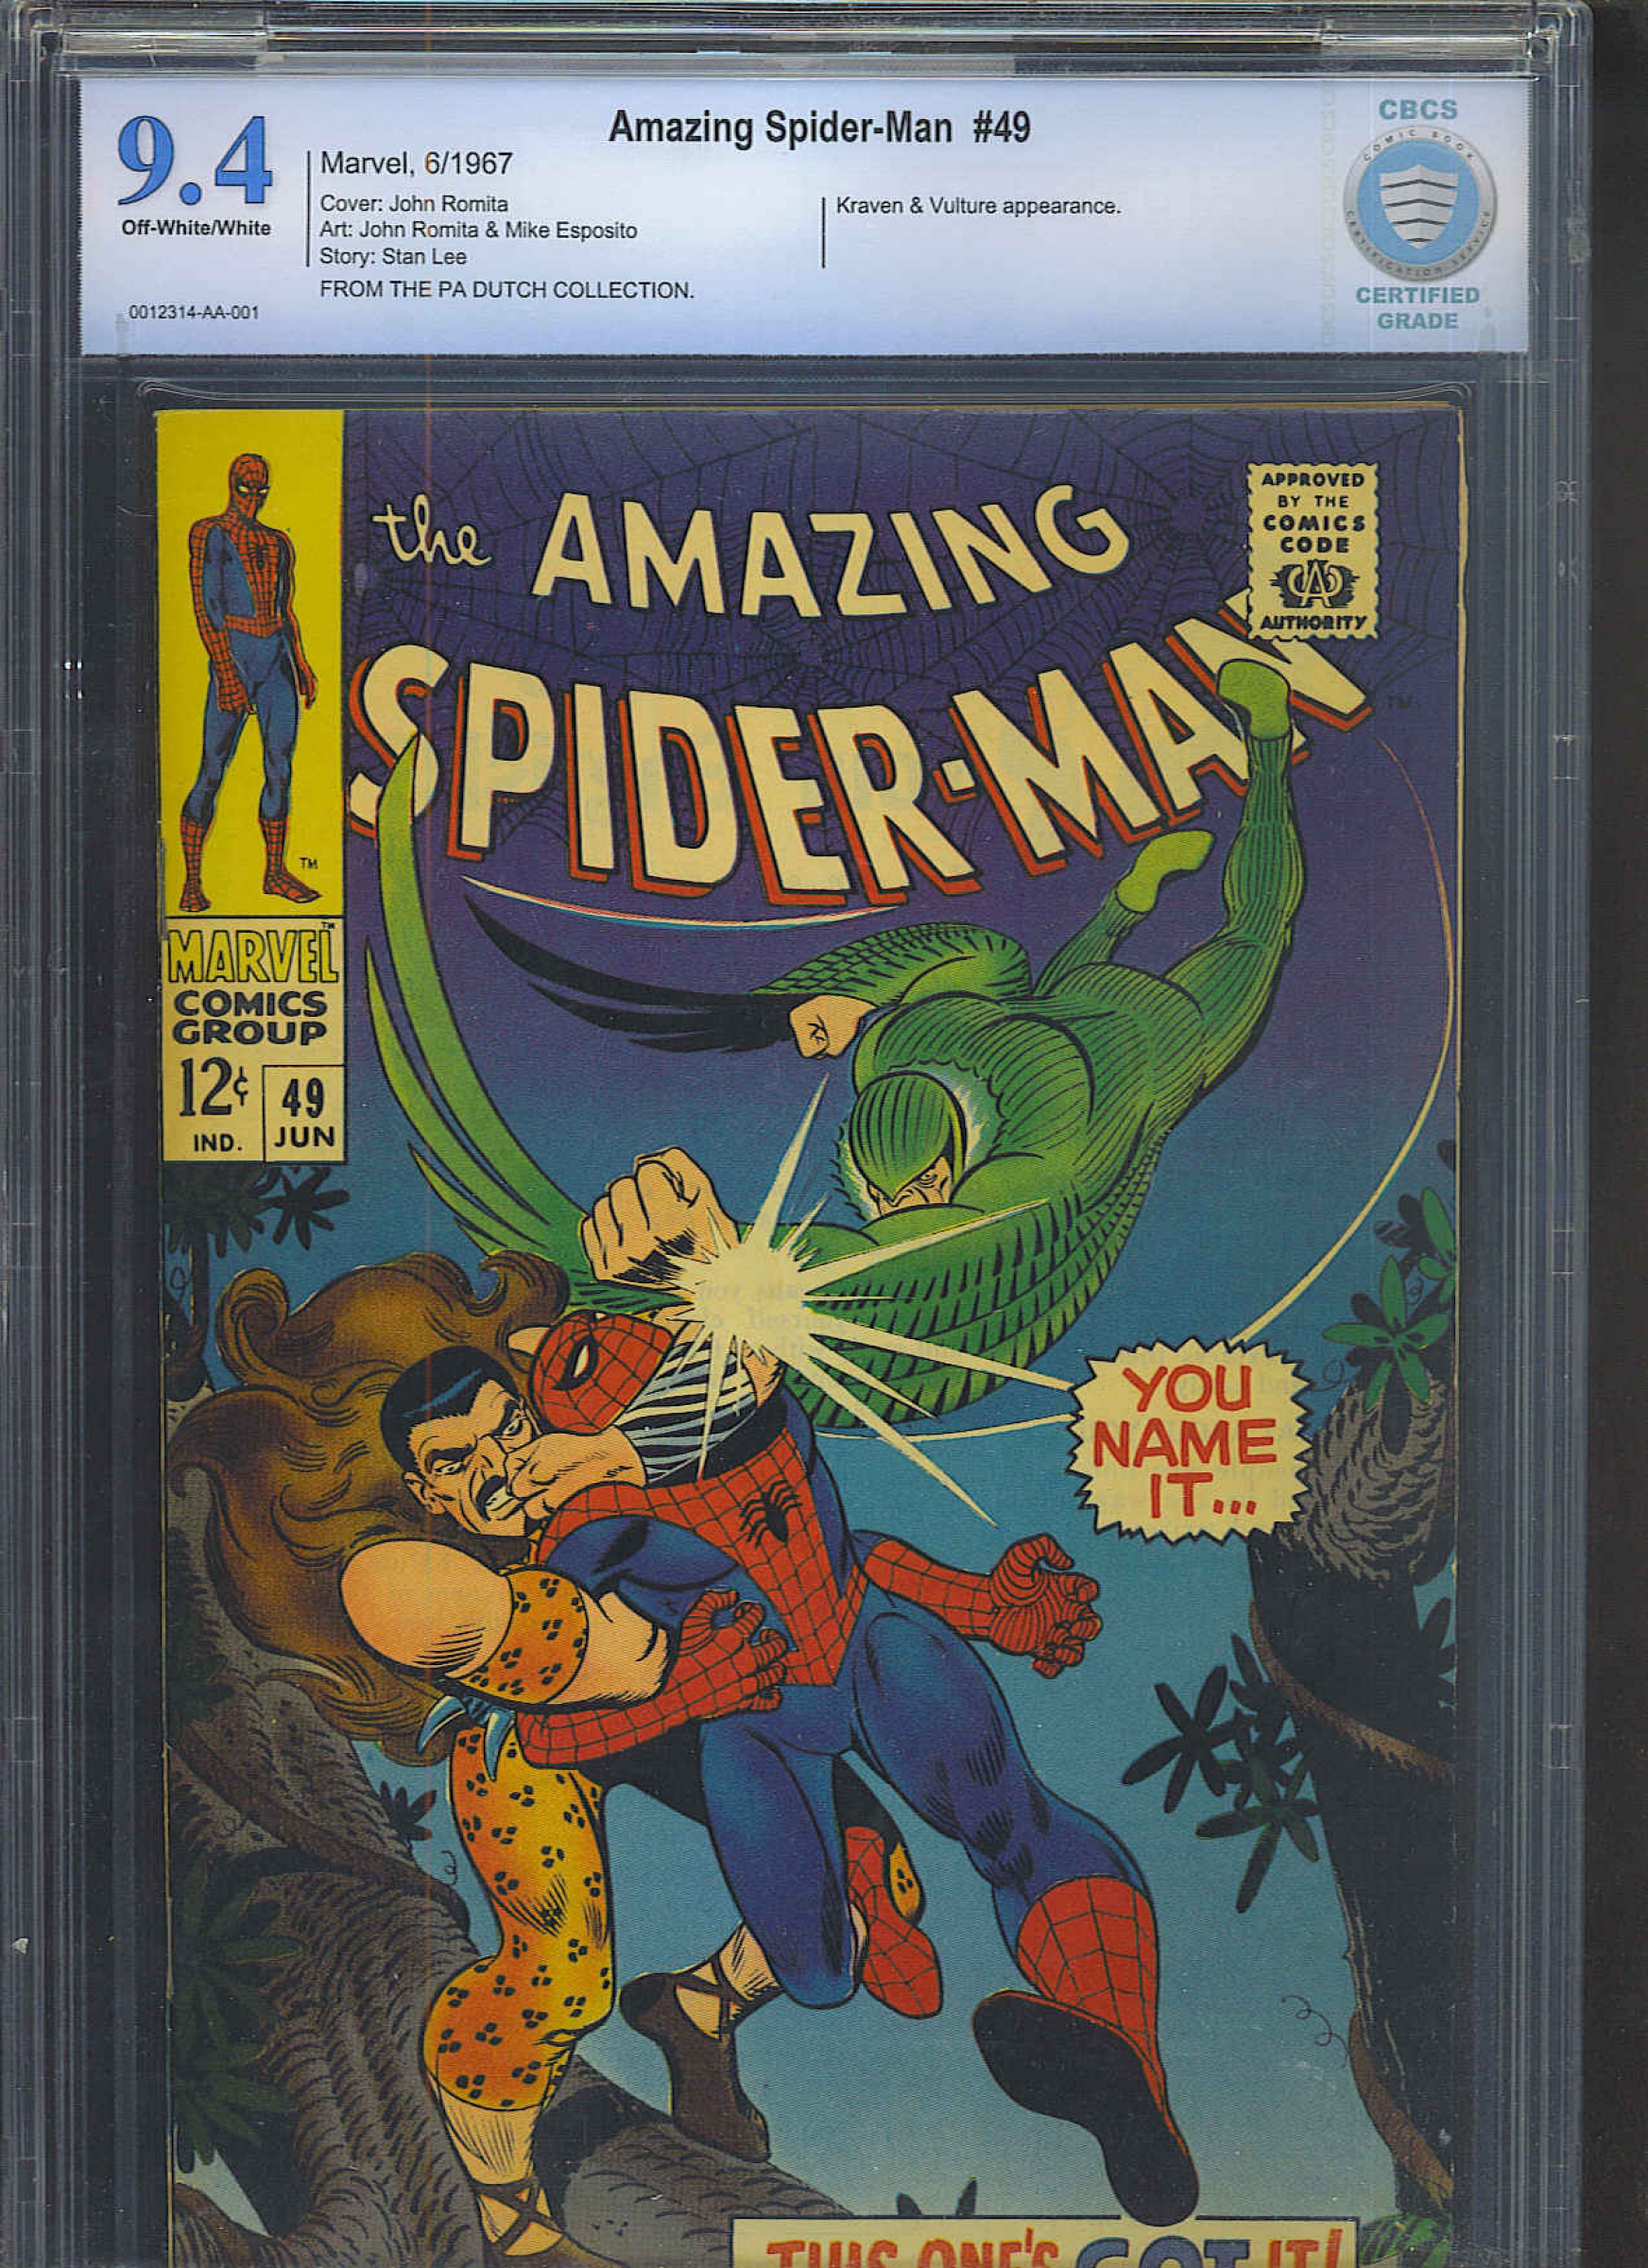 Amazing Spider-Man #49 CBCS 9.4 ow/w PA. Dutch Collection